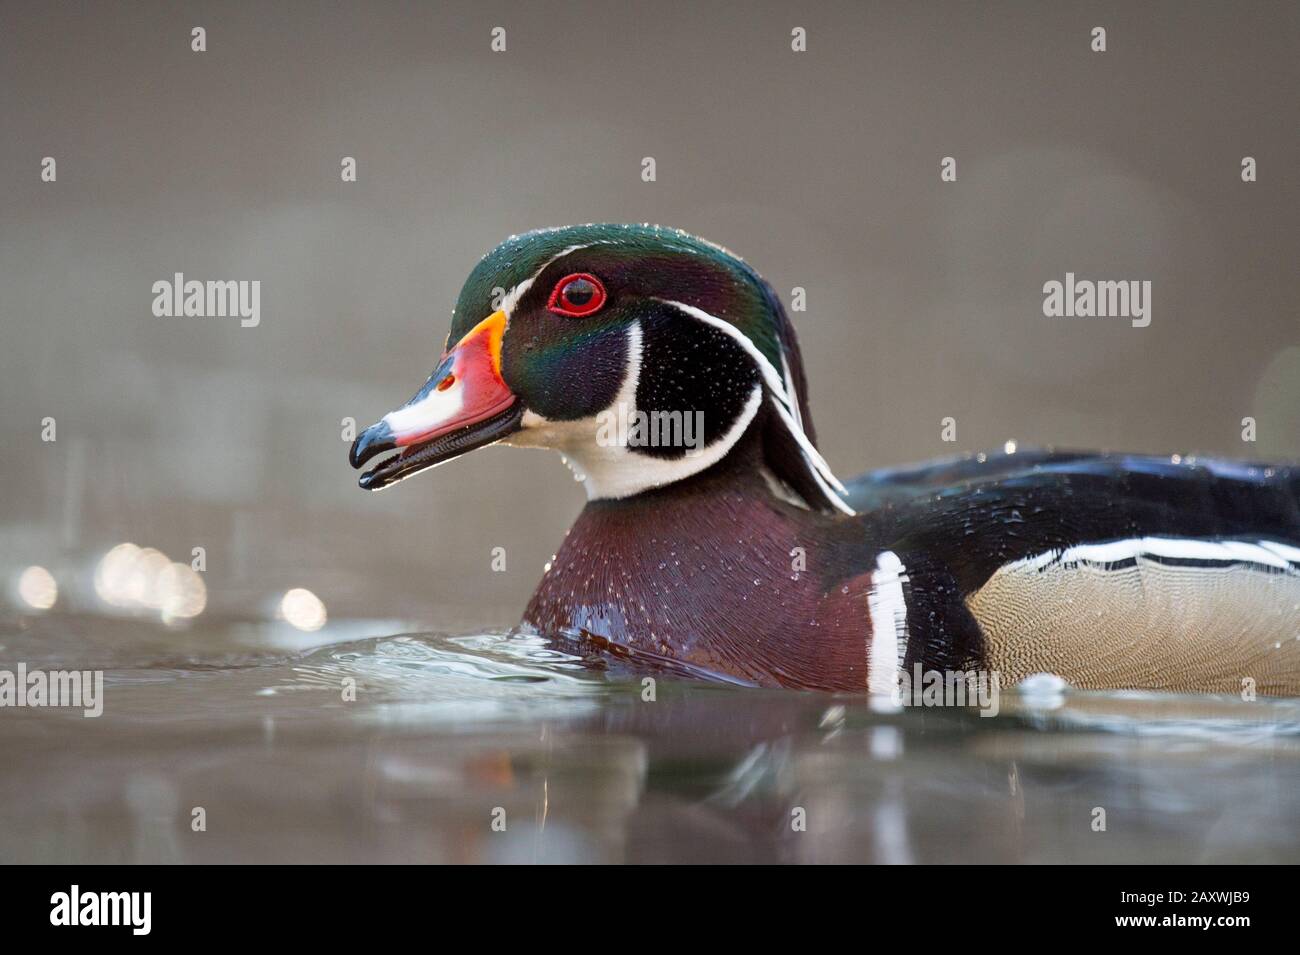 A close-up photo of a male wood duck floating on water with a smooth brown background in soft light. Stock Photo